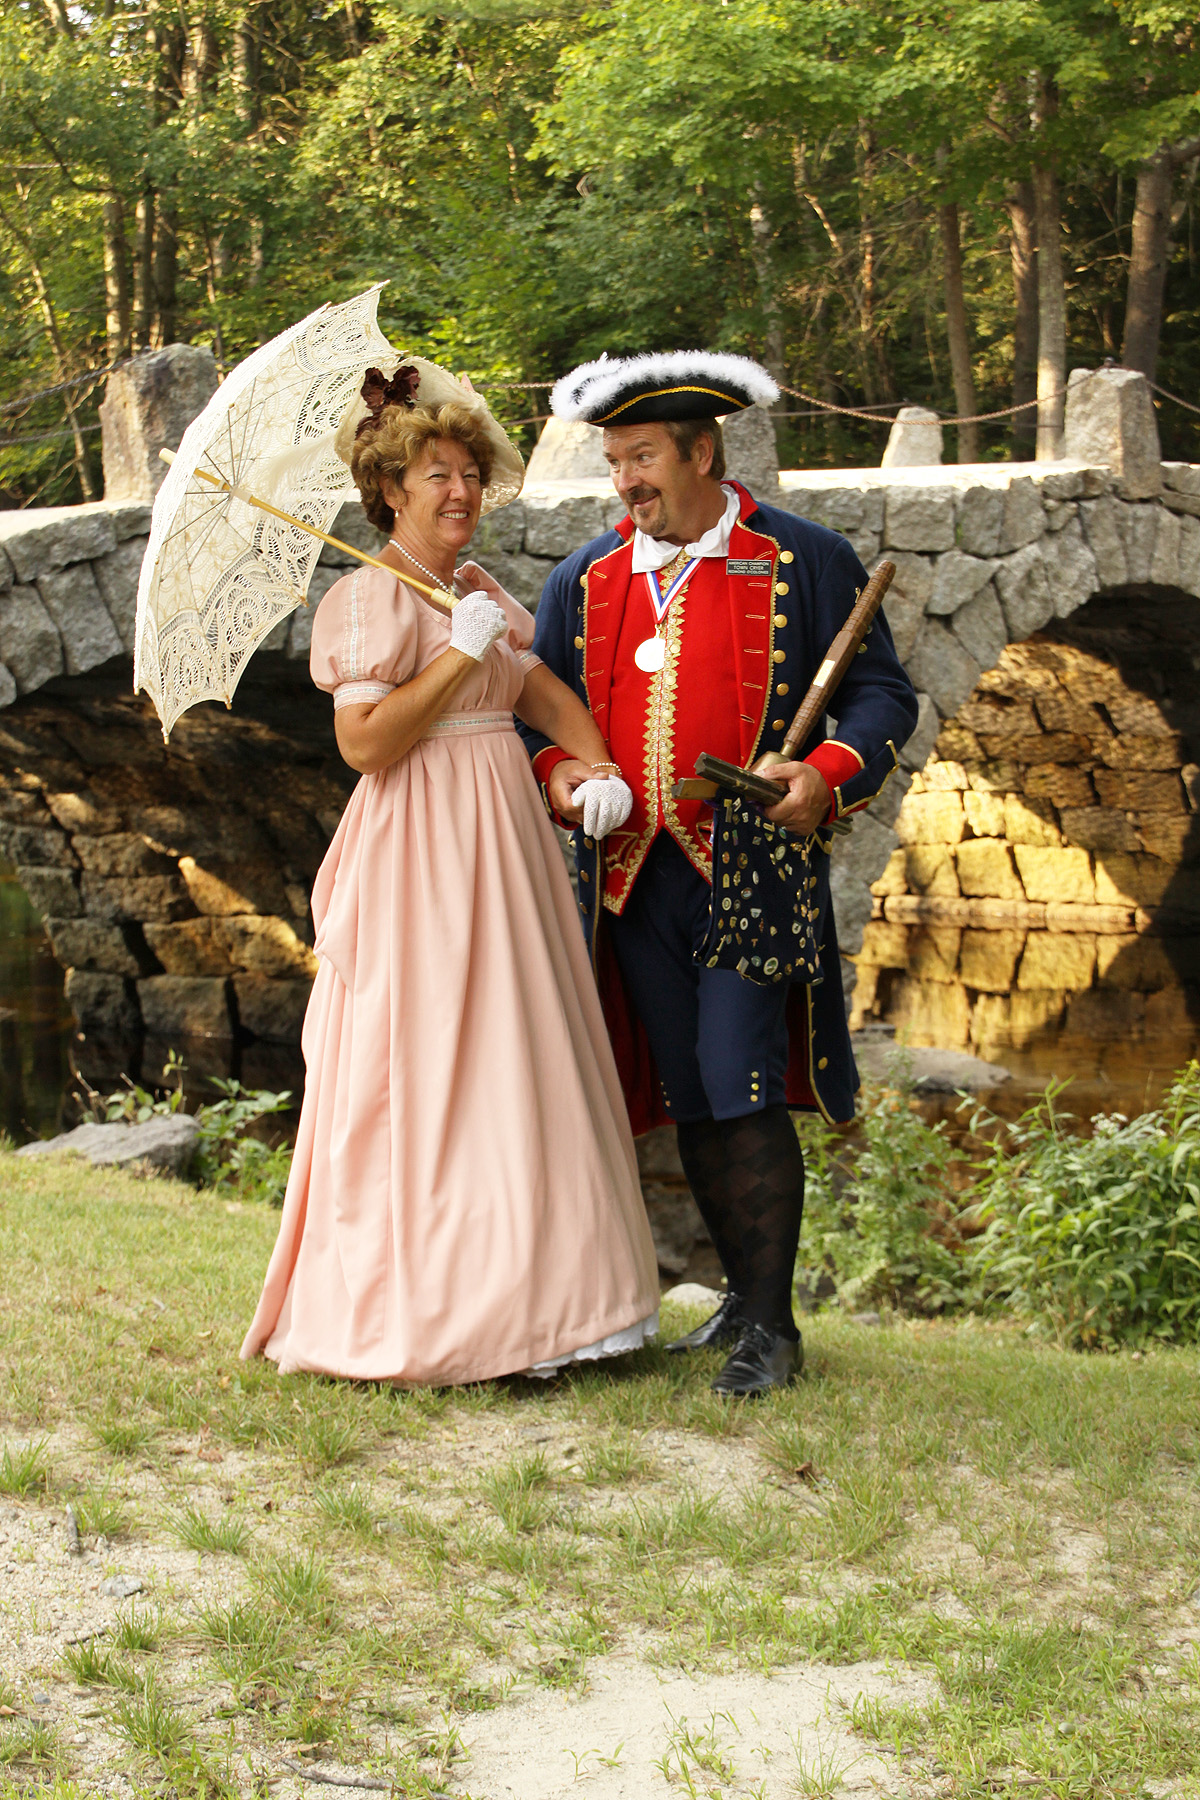 Town Crier And His Escort (user submitted)